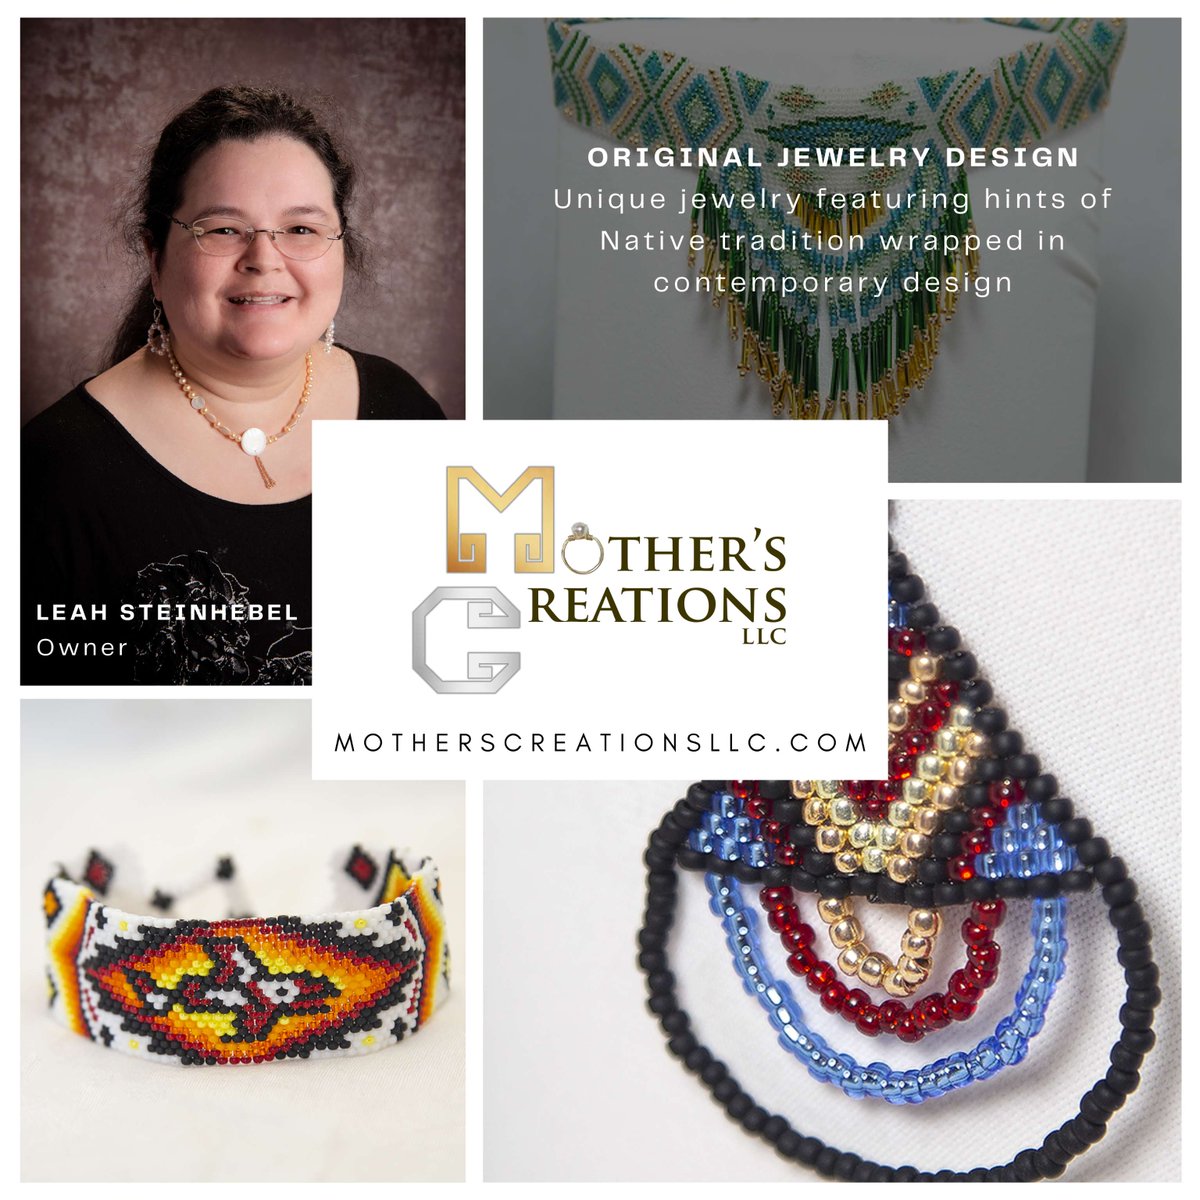 Grow and scale your business like Mother’s Creations LLC! NAYA’s Native Business Accelerator Program is accepting applications for our 2024 cohort! Apply at: ow.ly/ytfv50QhcI2 Learn more about Mother’s Creations here: ow.ly/ogq450QhcI1